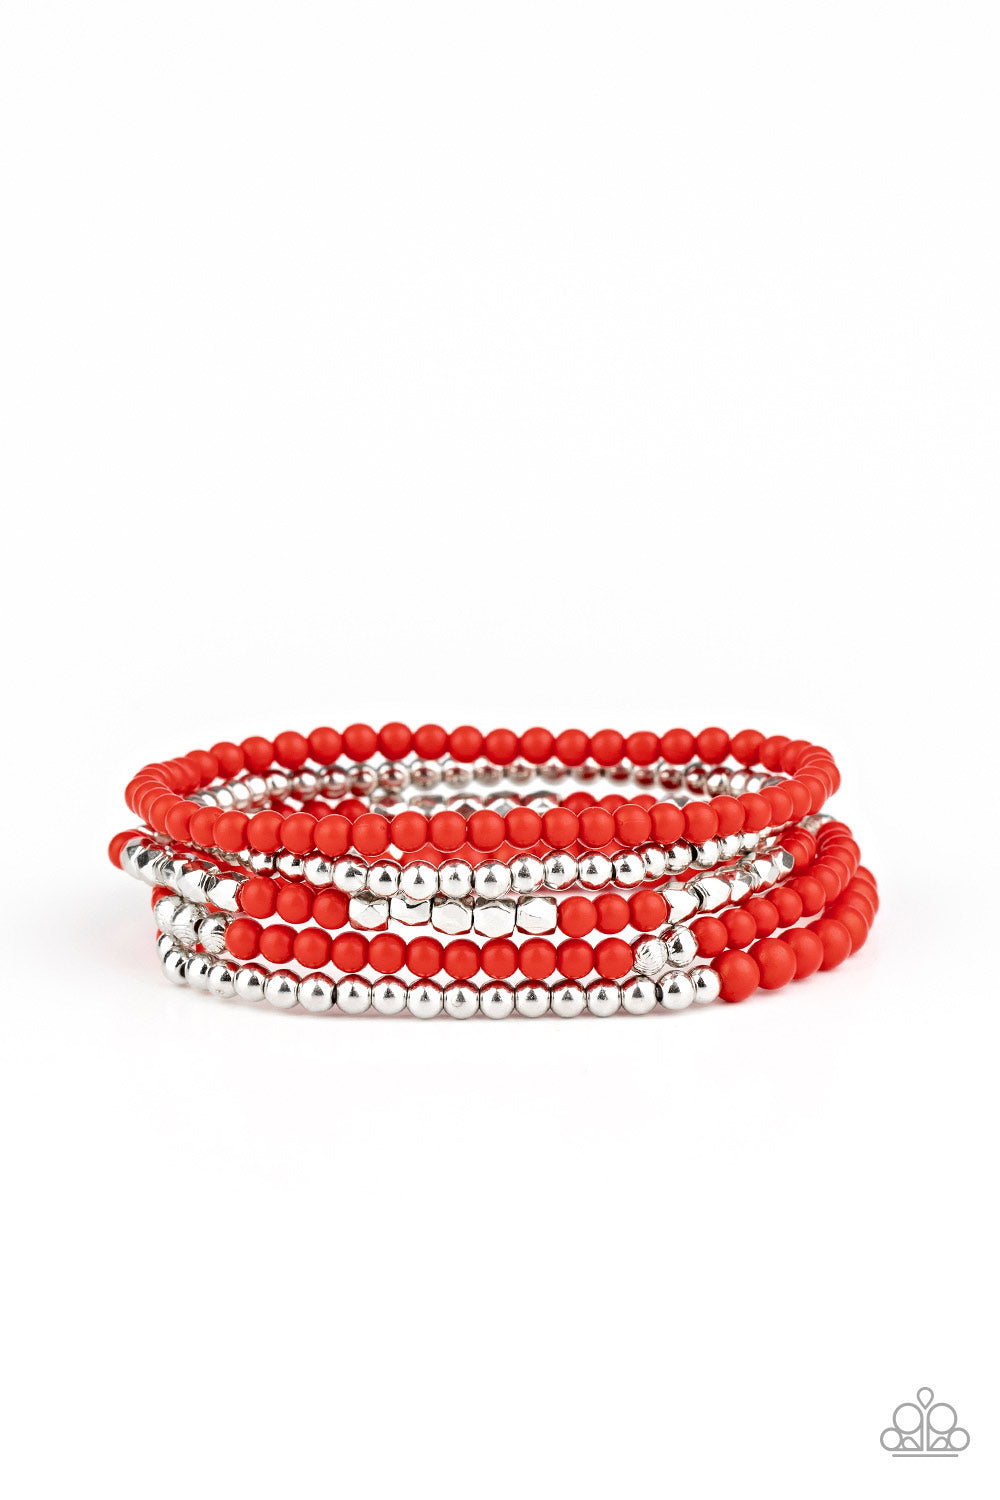 five-dollar-jewelry-stacked-showcase-red-paparazzi-accessories